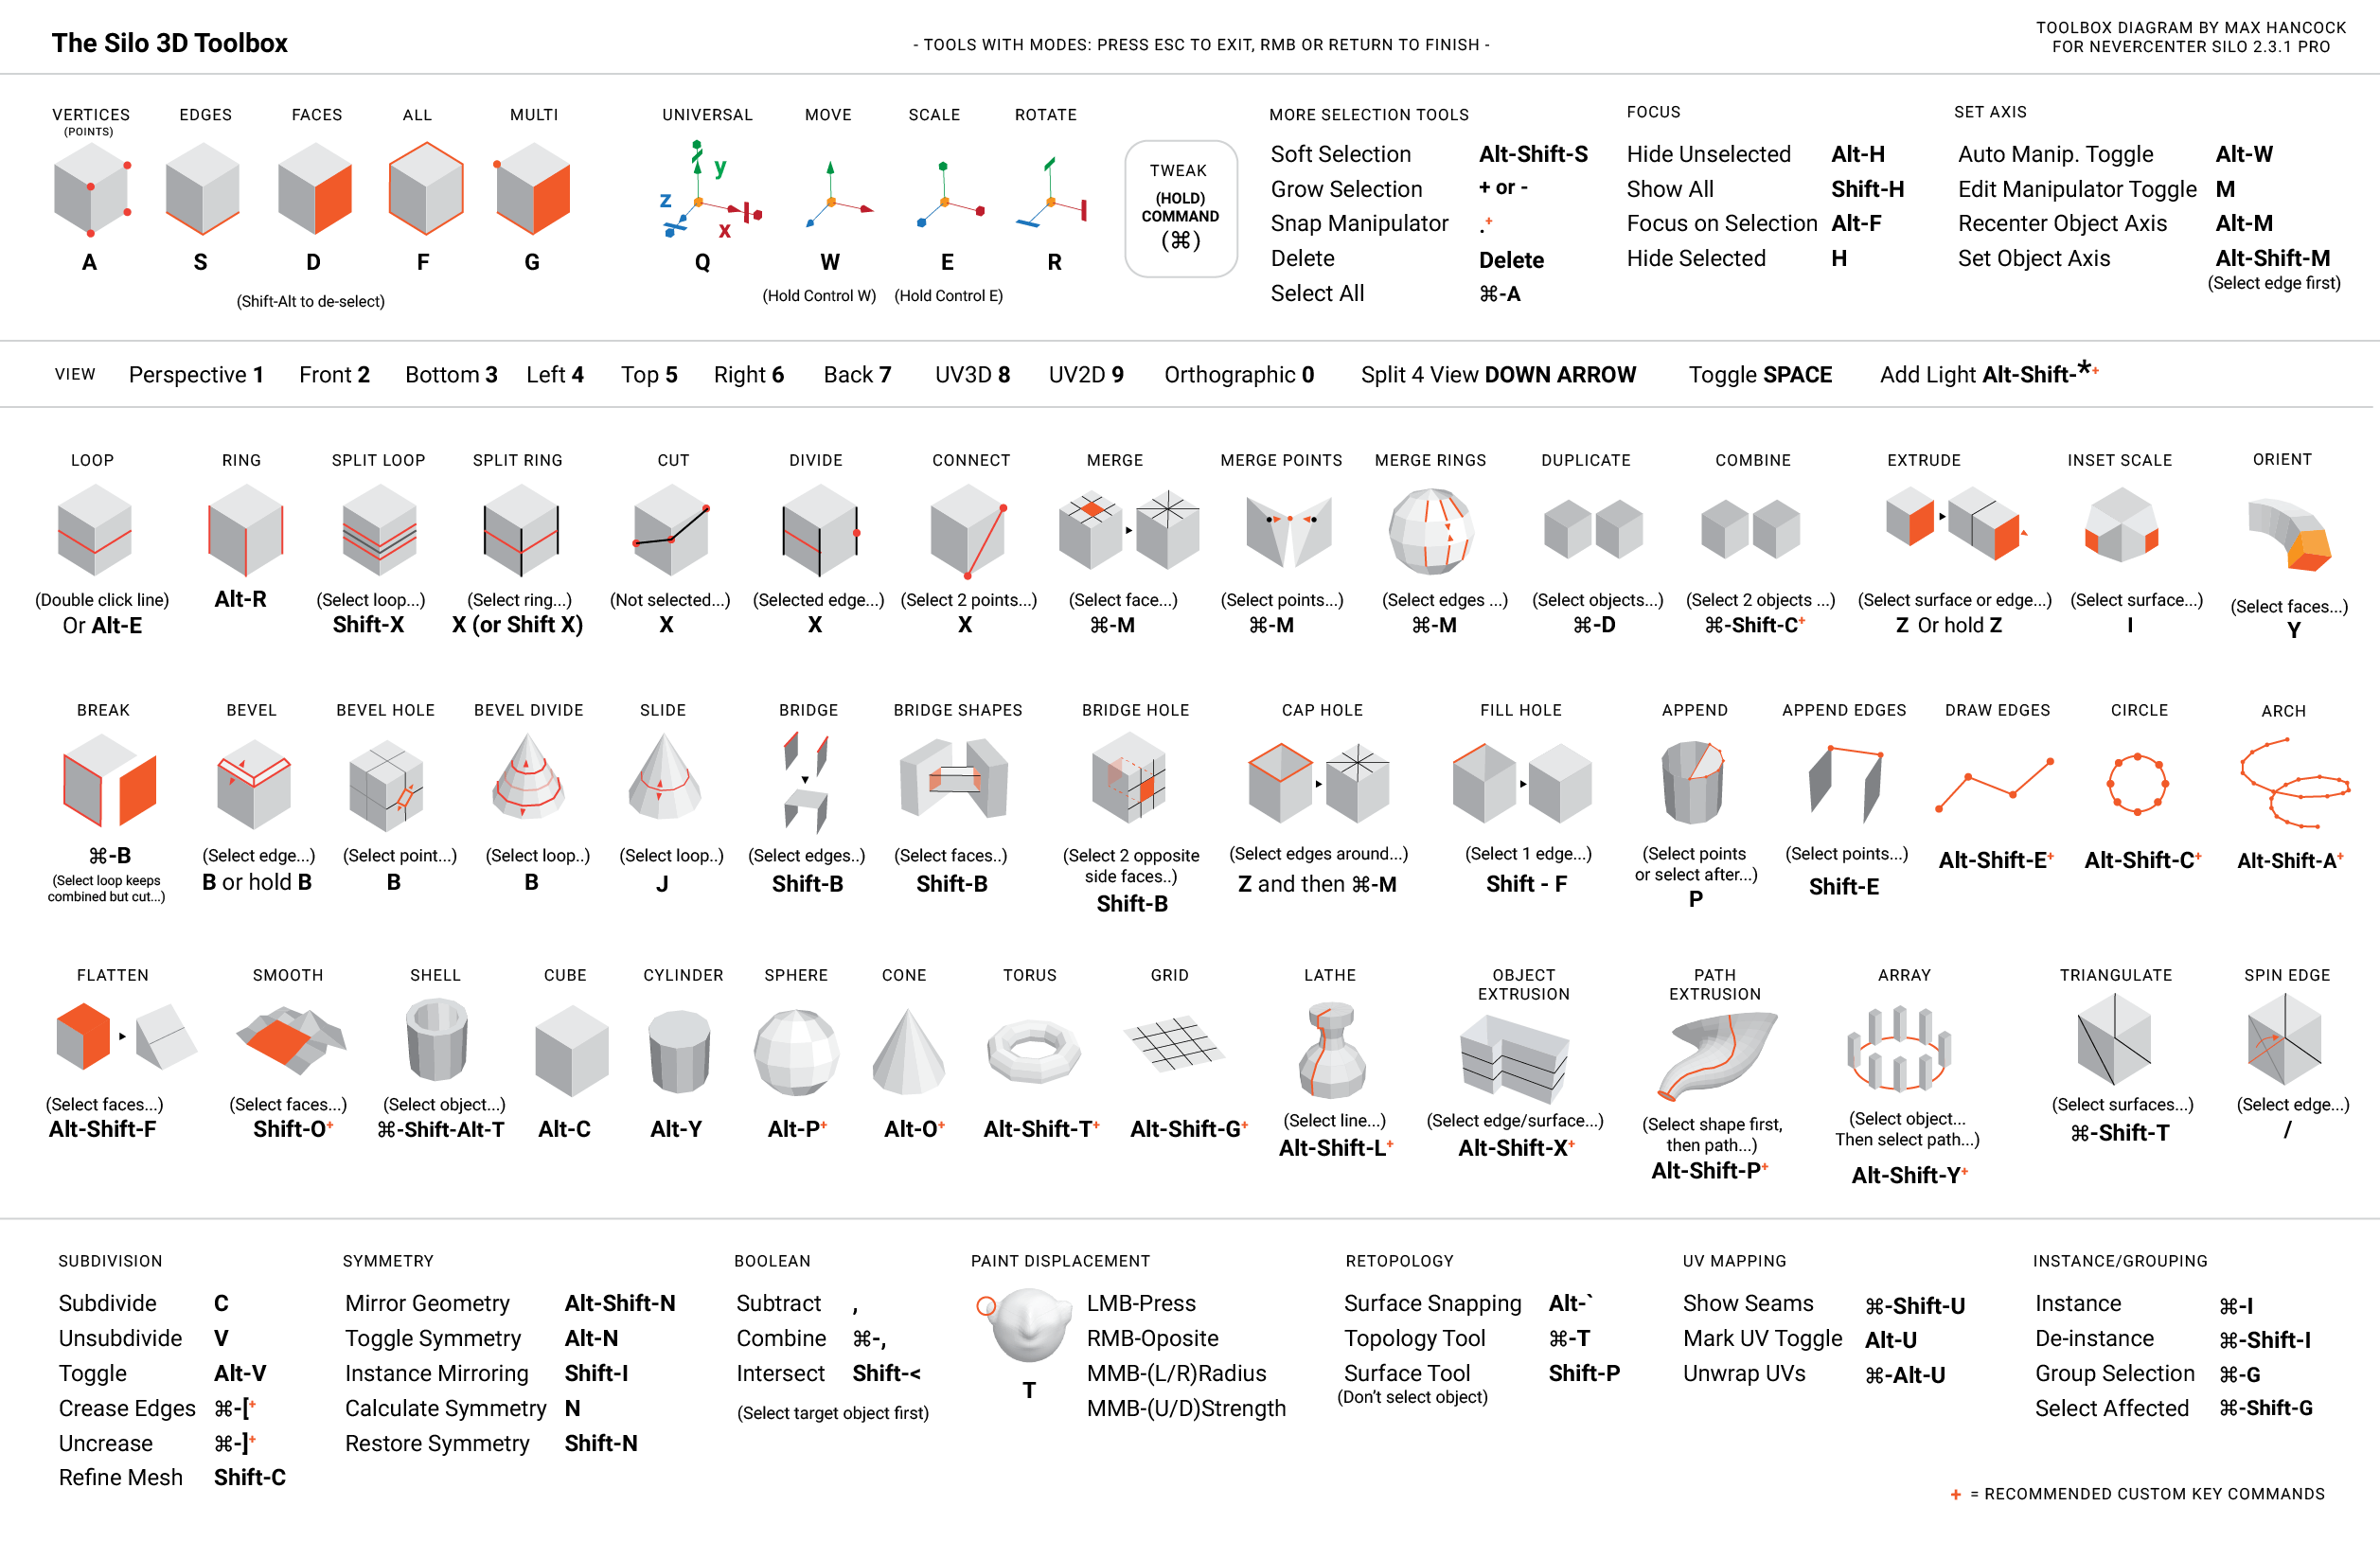 The Silo 3D Toolbox - key command reference chart